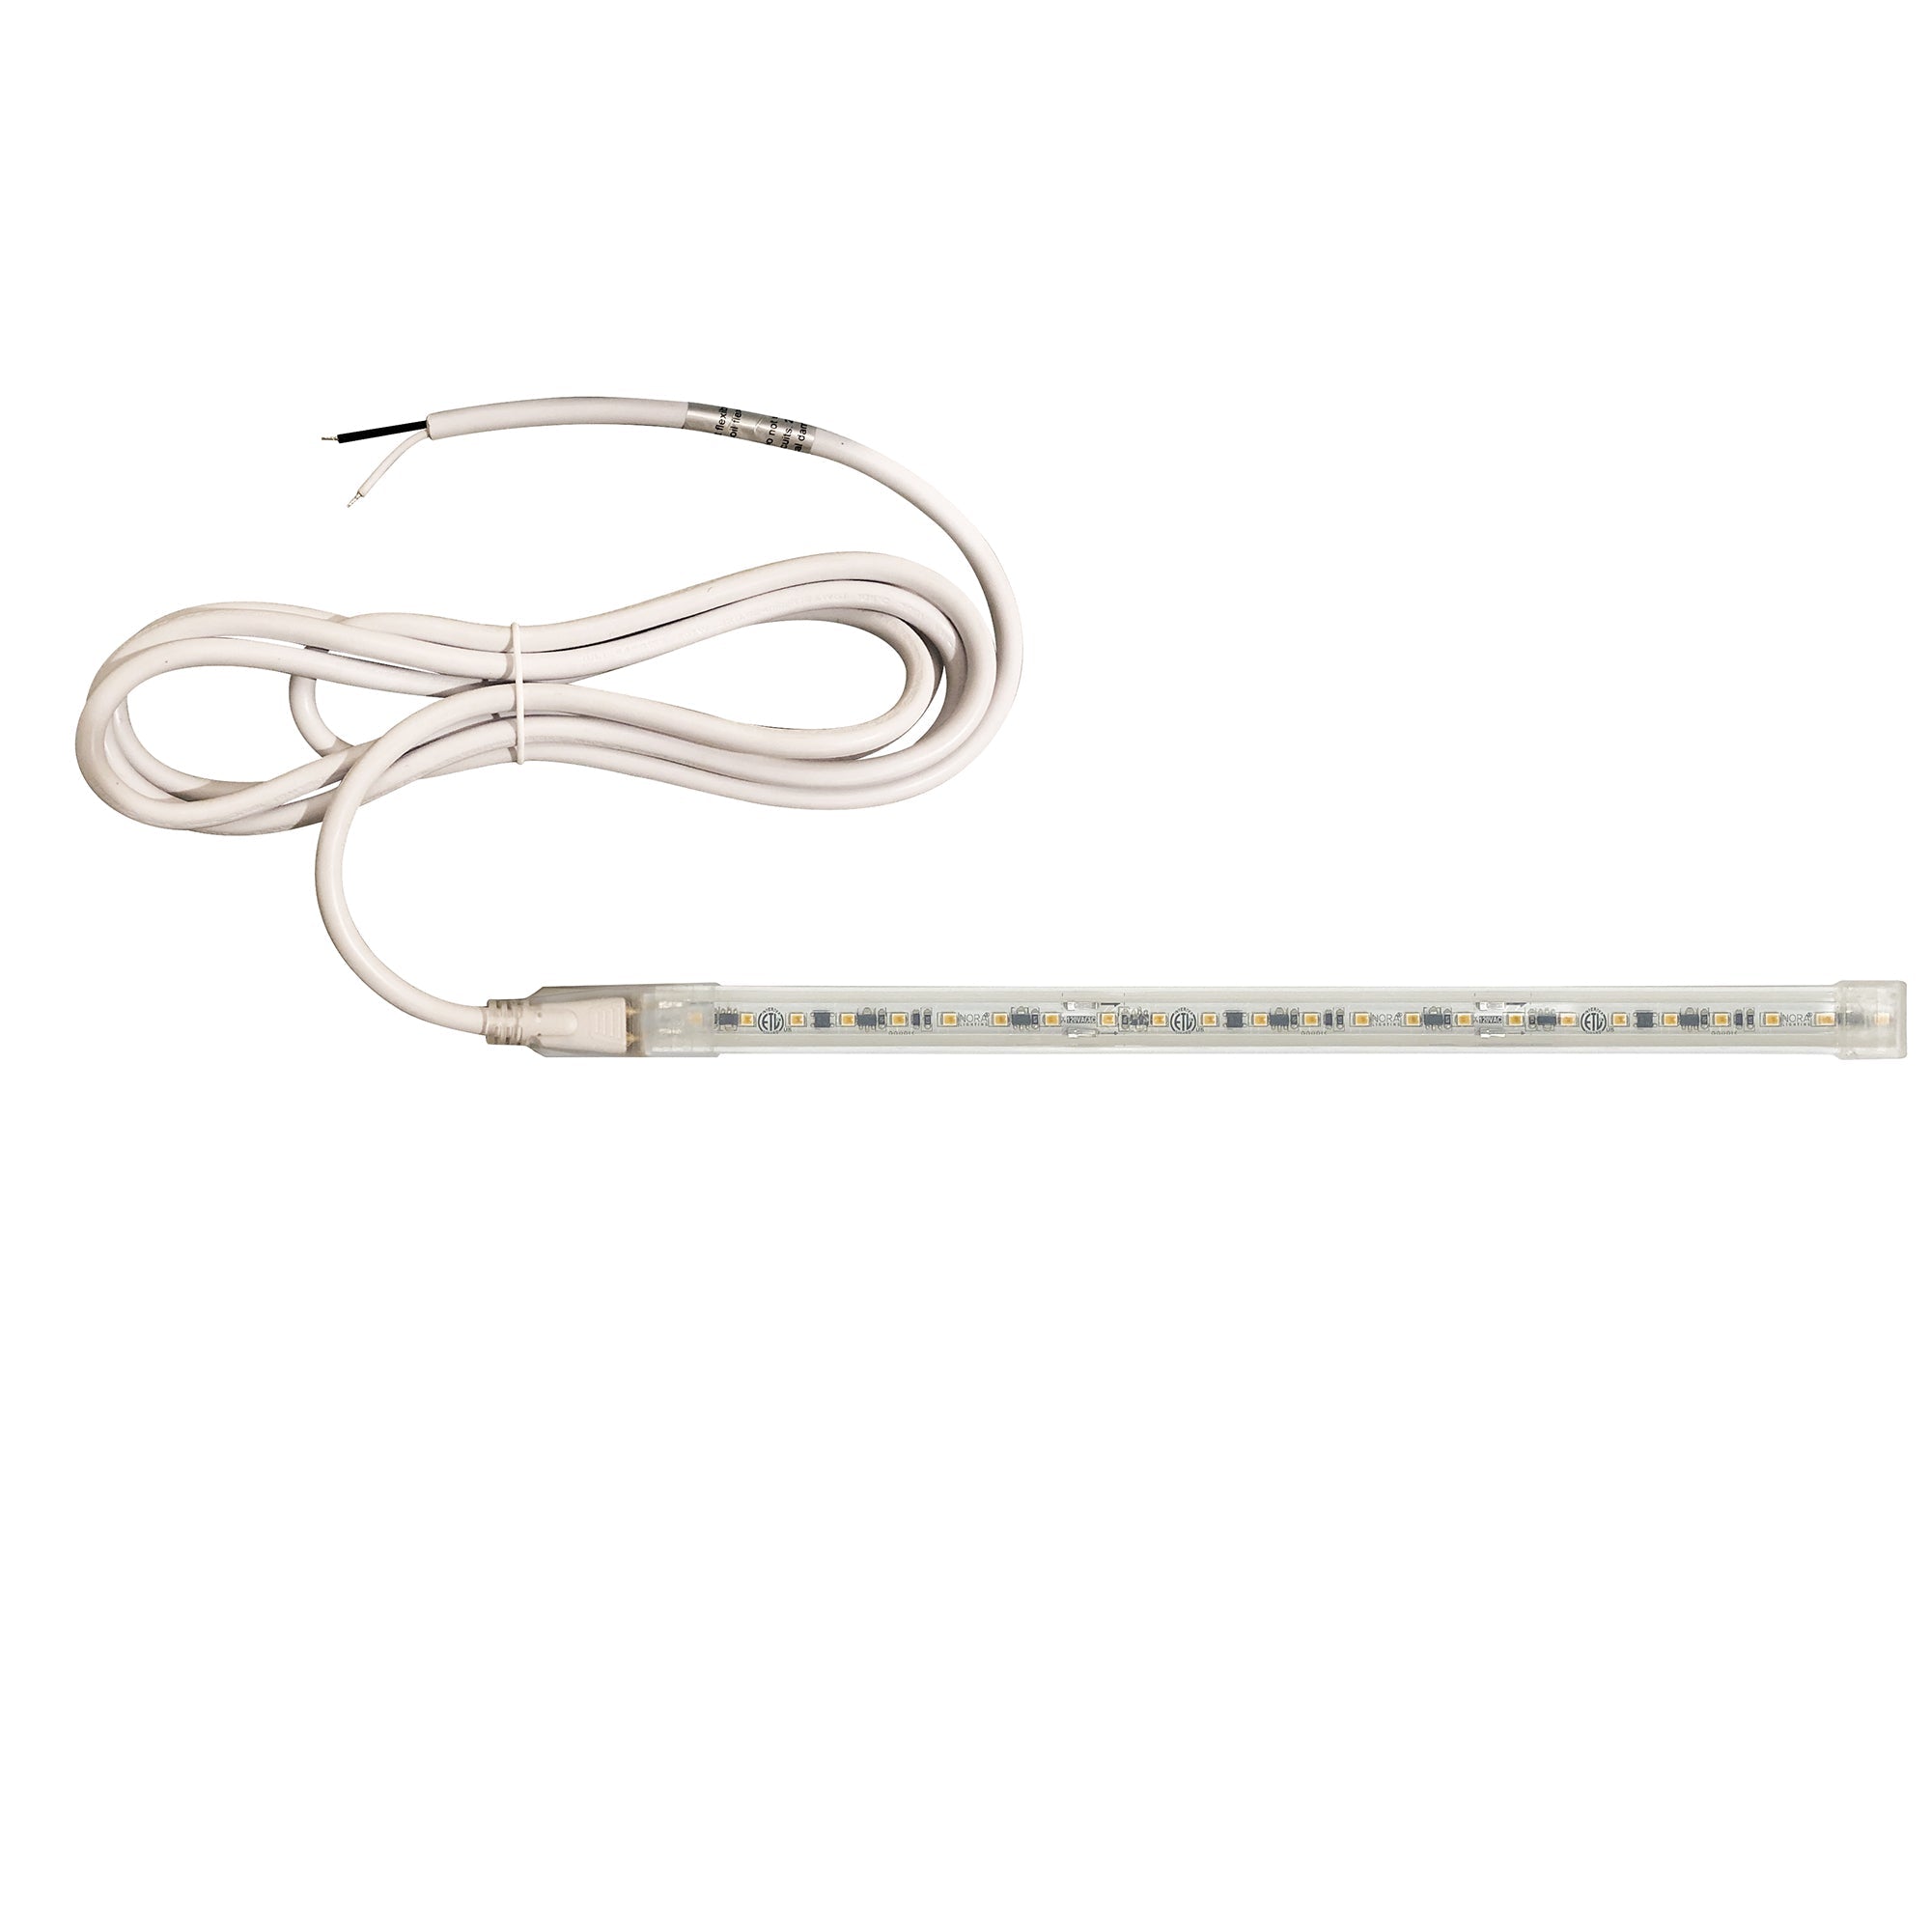 Nora Lighting NUTP13-W65-12-930/HW - Accent / Undercabinet - Custom Cut 65-ft 120V Continuous LED Tape Light, 330lm / 3.6W per foot, 3000K, w/ Mounting Clips and 8' Hardwired Power Cord